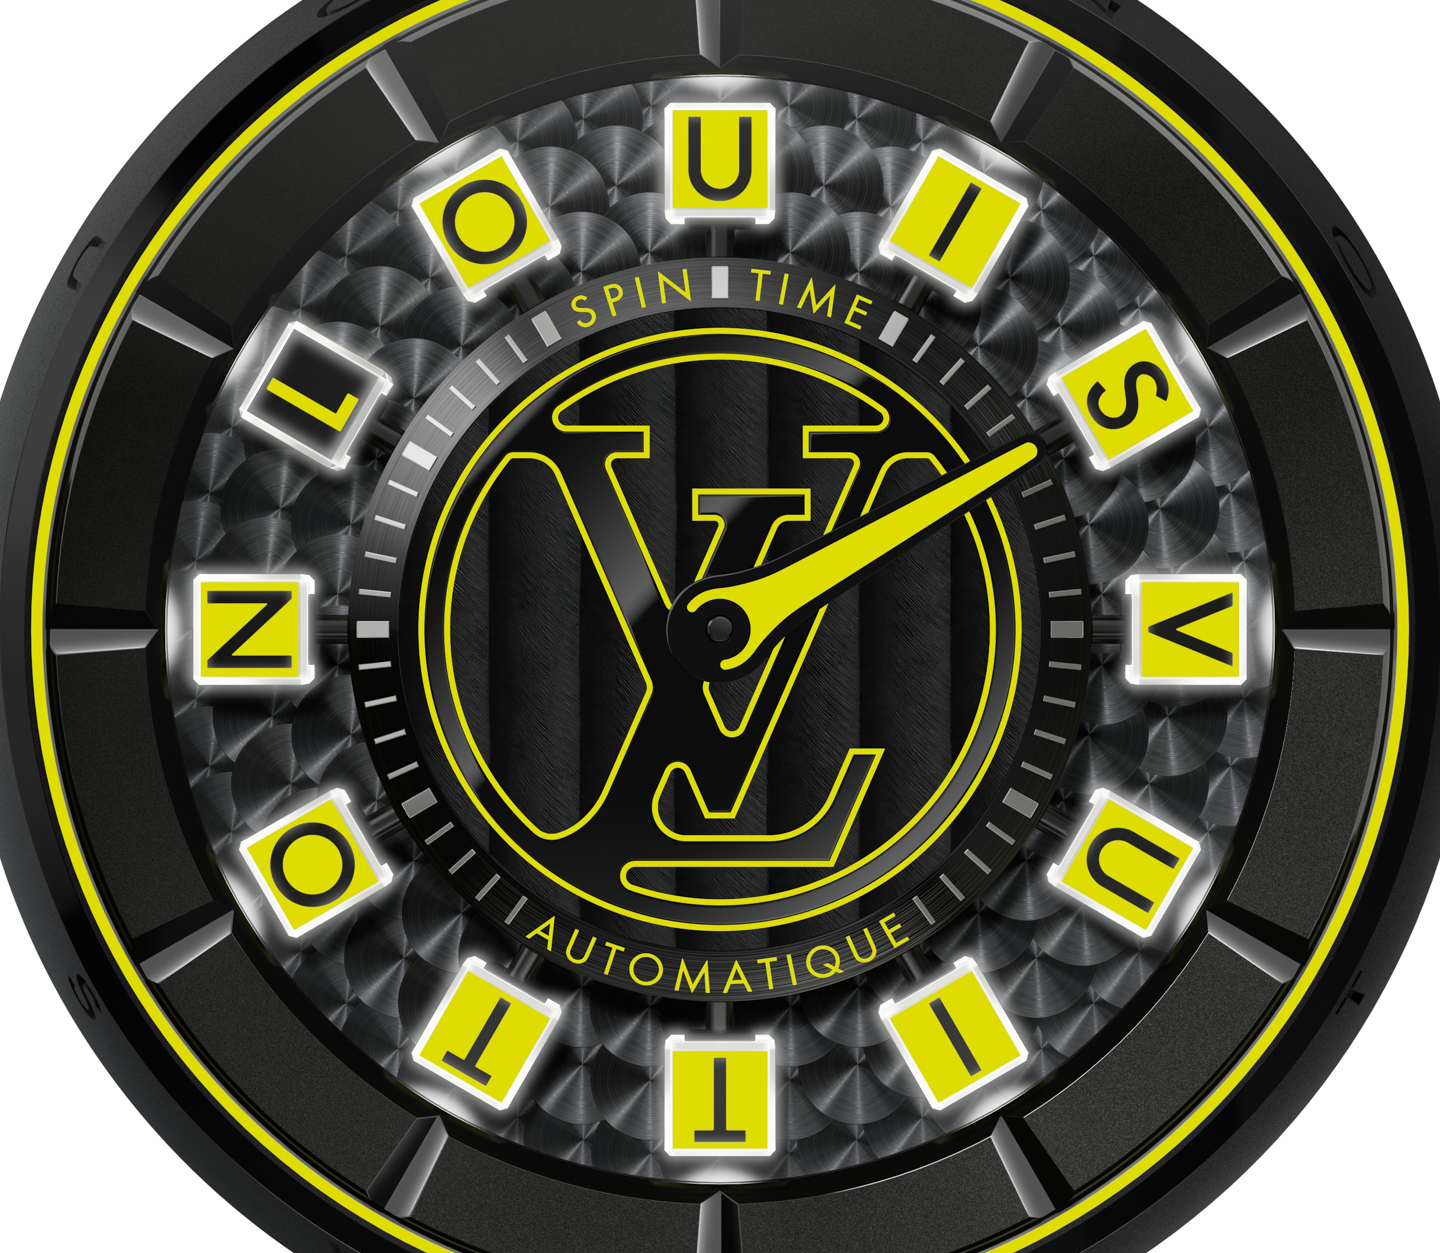 Louis Vuitton Tambour Spin Time Air Quantum: “Lit” Non-Traditional High  Watchmaking - Reprise - Quill & Pad